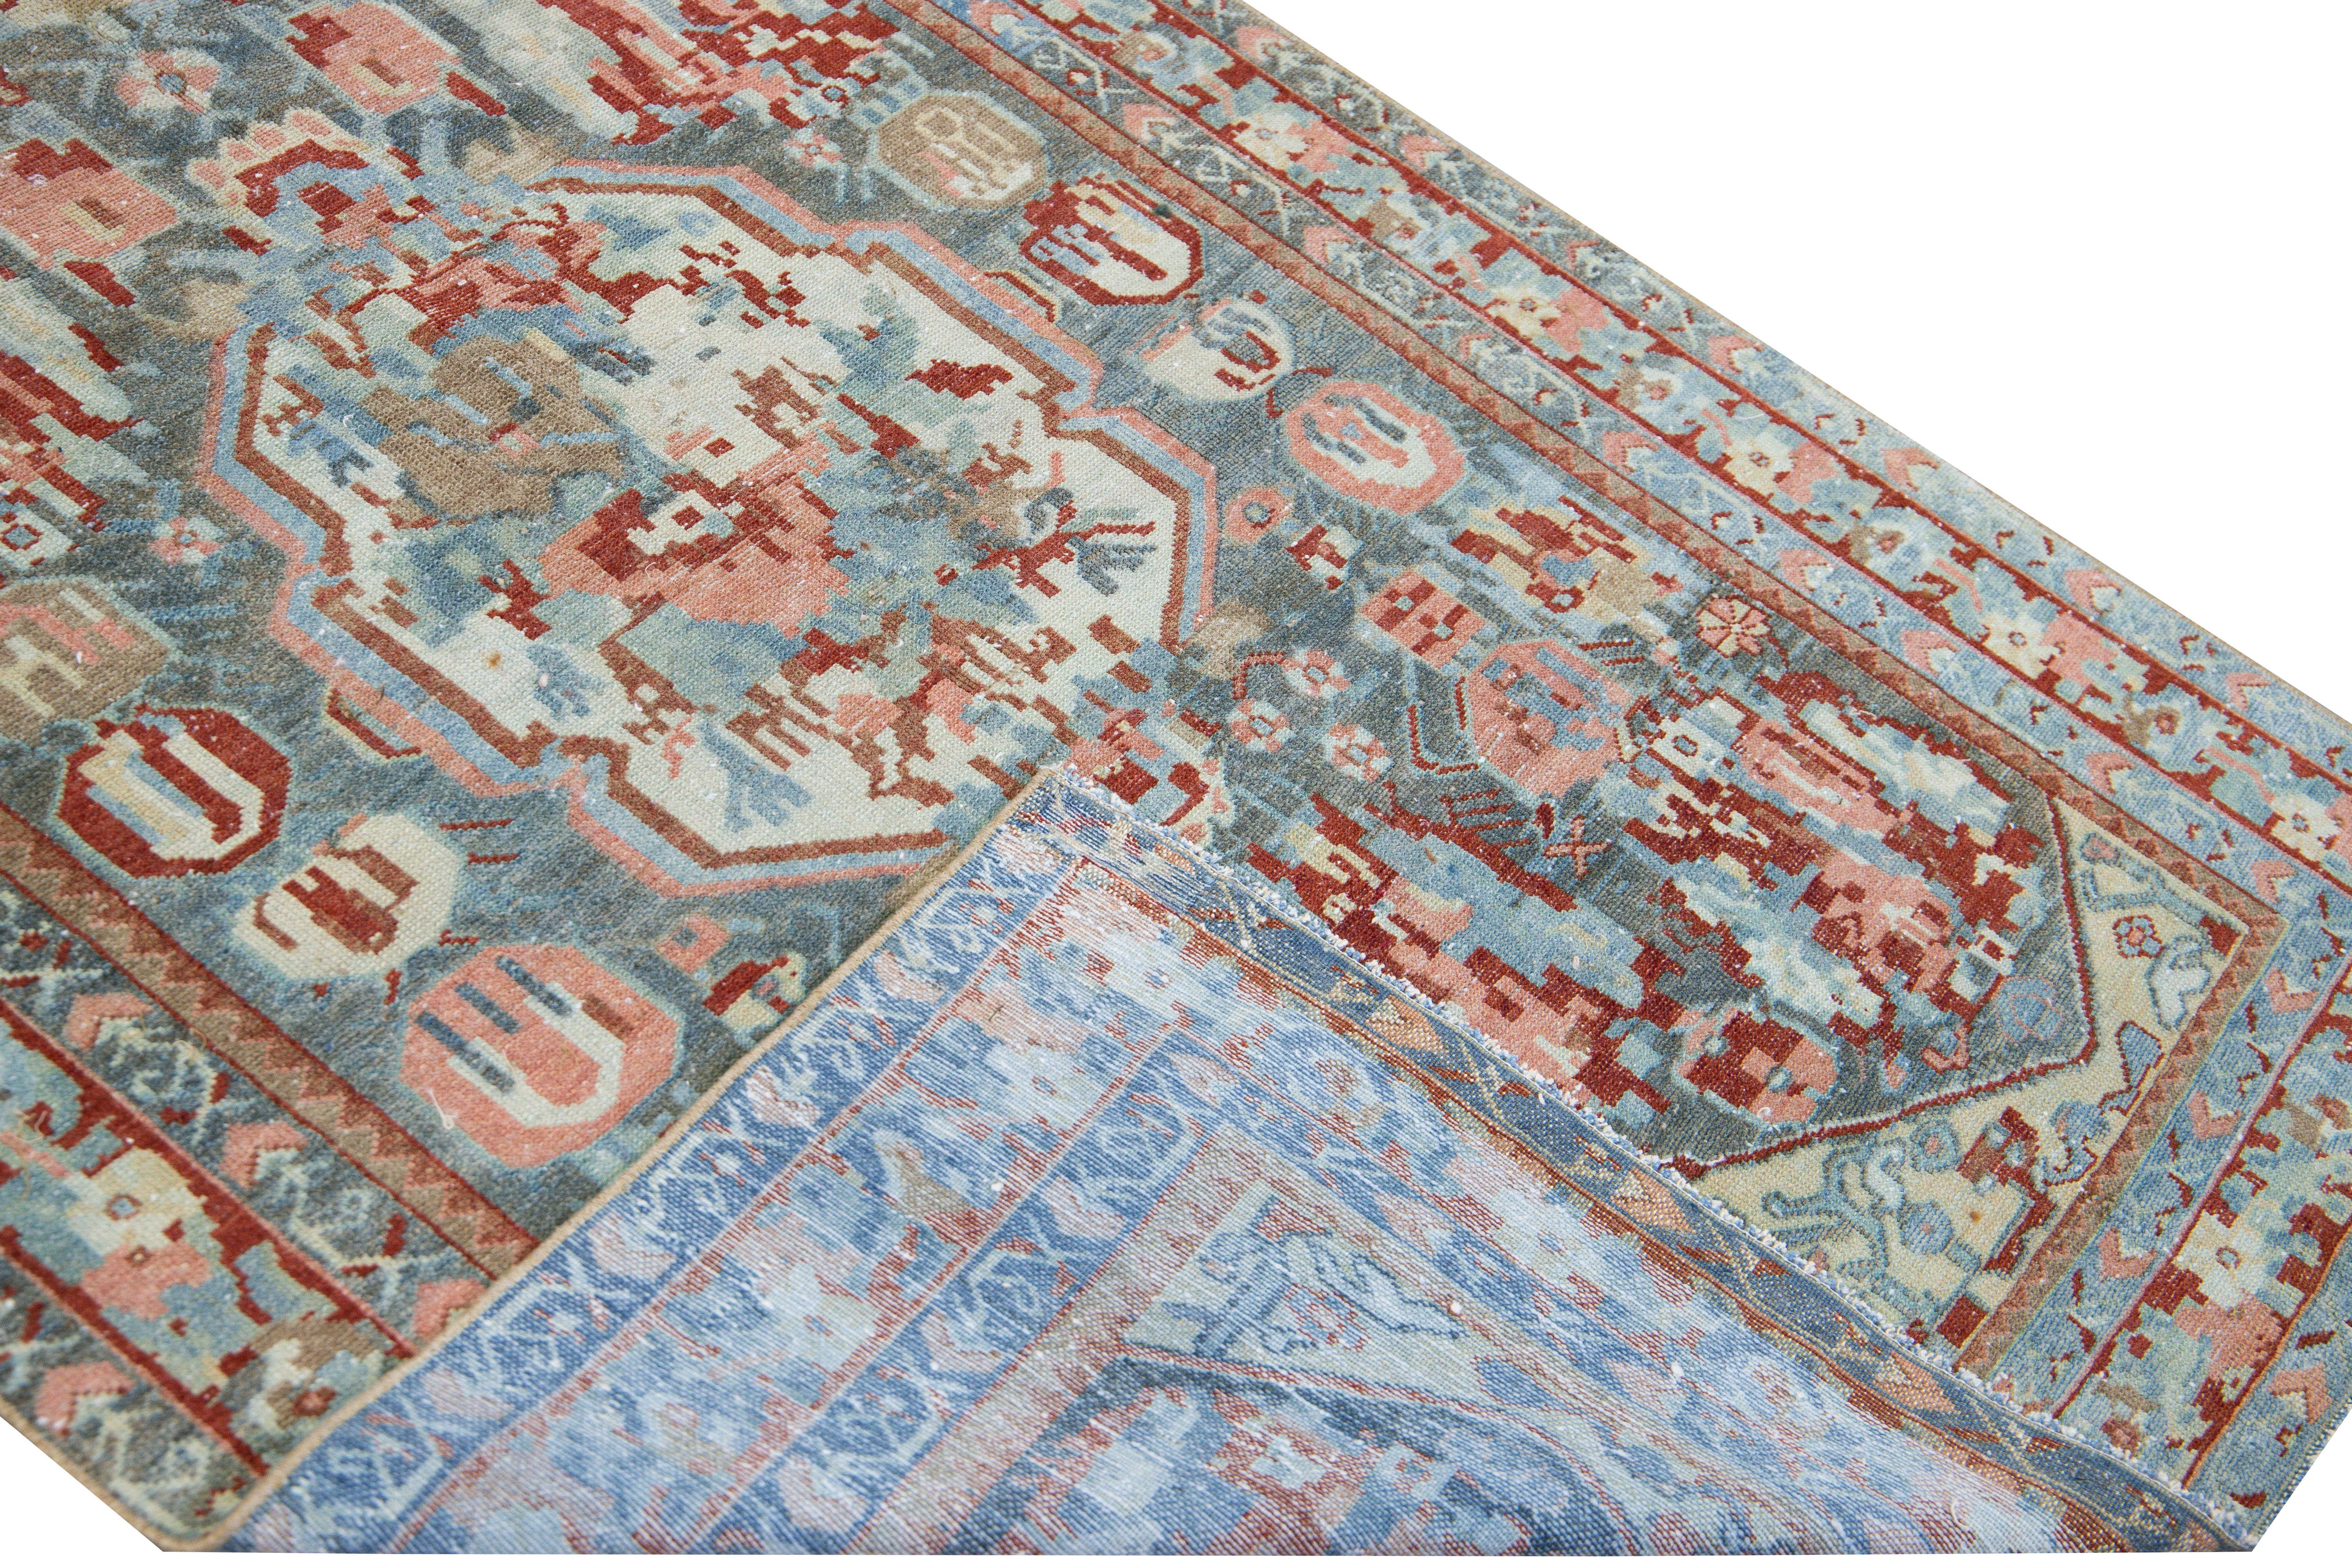 Beautiful antique Karabagh hand-knotted wool runner with a blue field. This Persian runner has pink, red, brown, and ivory accents in a gorgeous all-over layout medallion floral motif.

This rug measures 4' x 11' 6